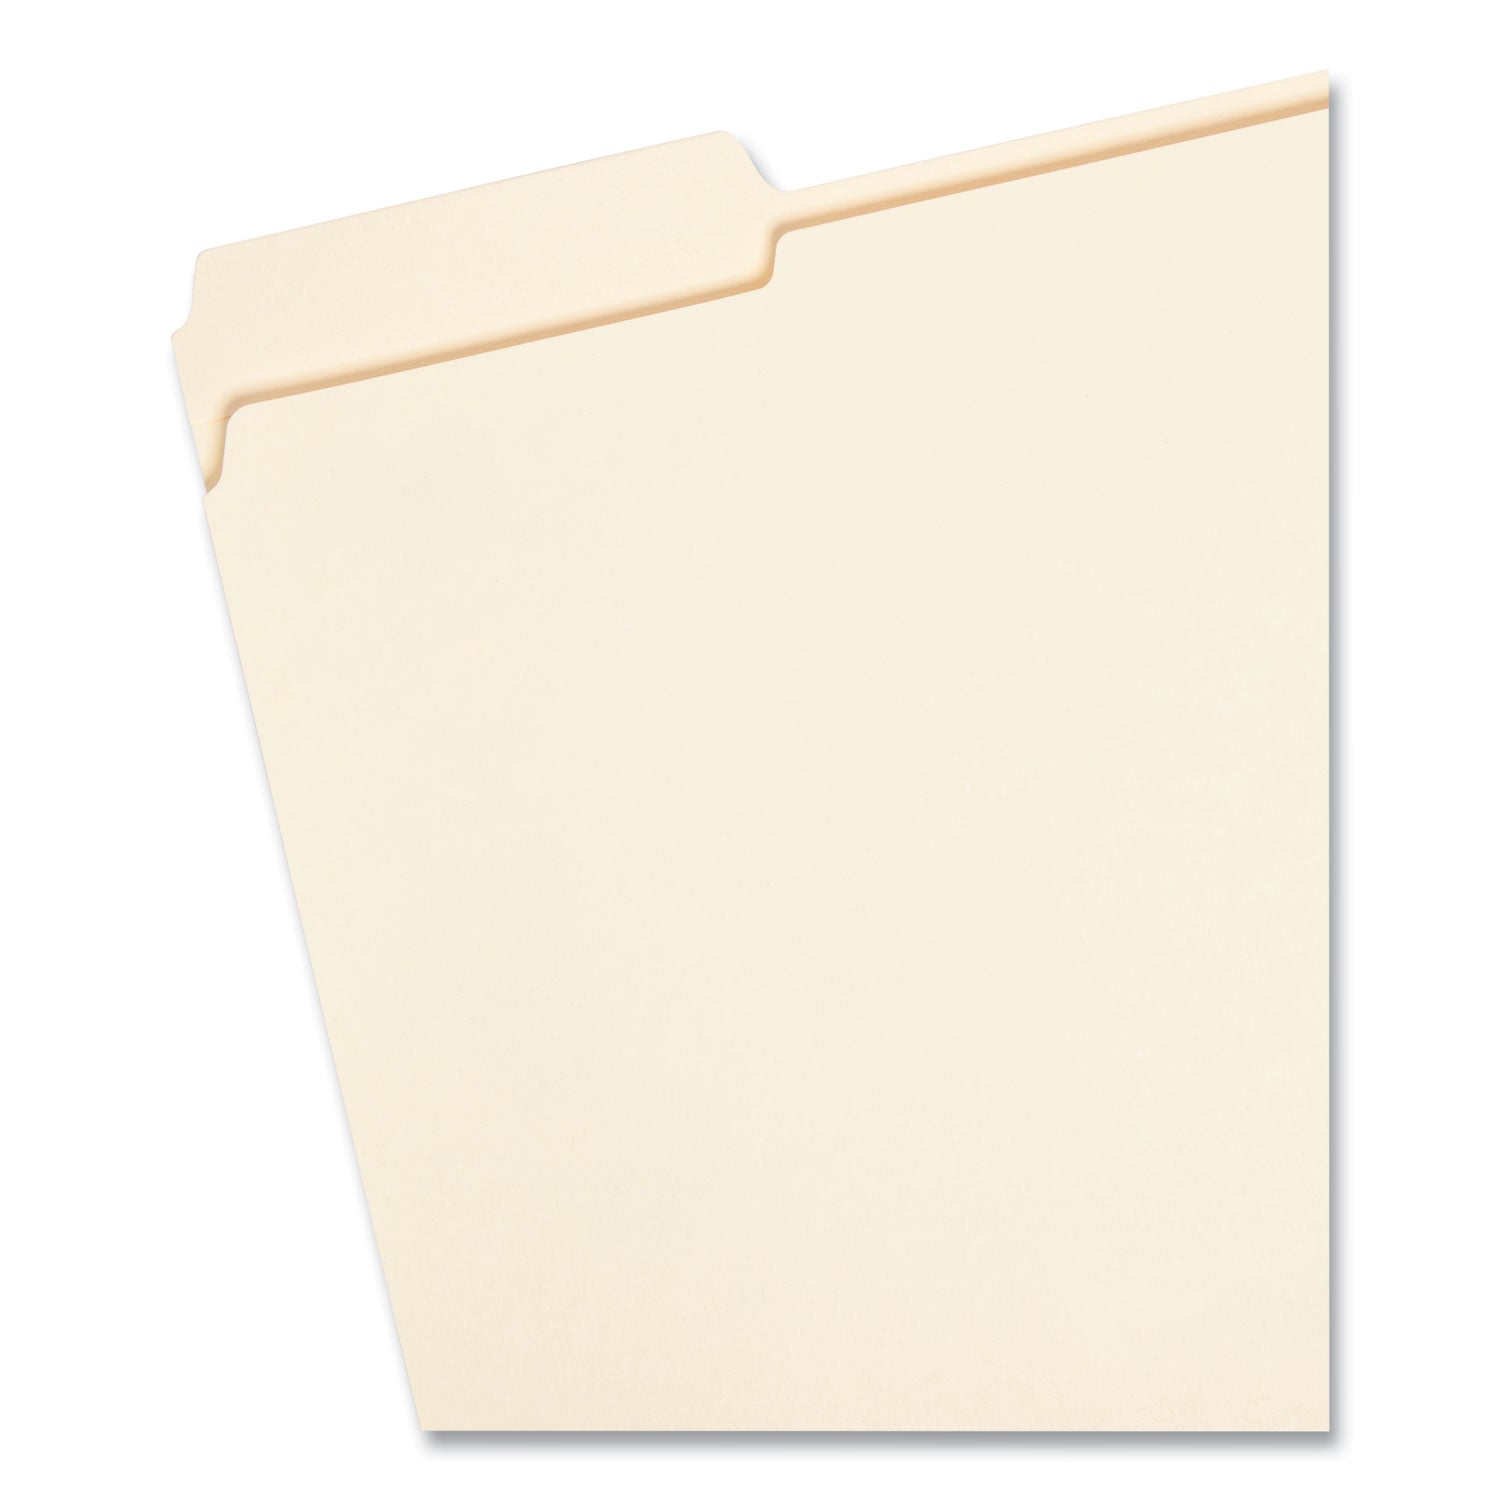 Reinforced Tab Manila File Folders, 1/3-Cut Tabs: Assorted, Letter Size, 0.75" Expansion, 11-pt Manila, 100/Box - 